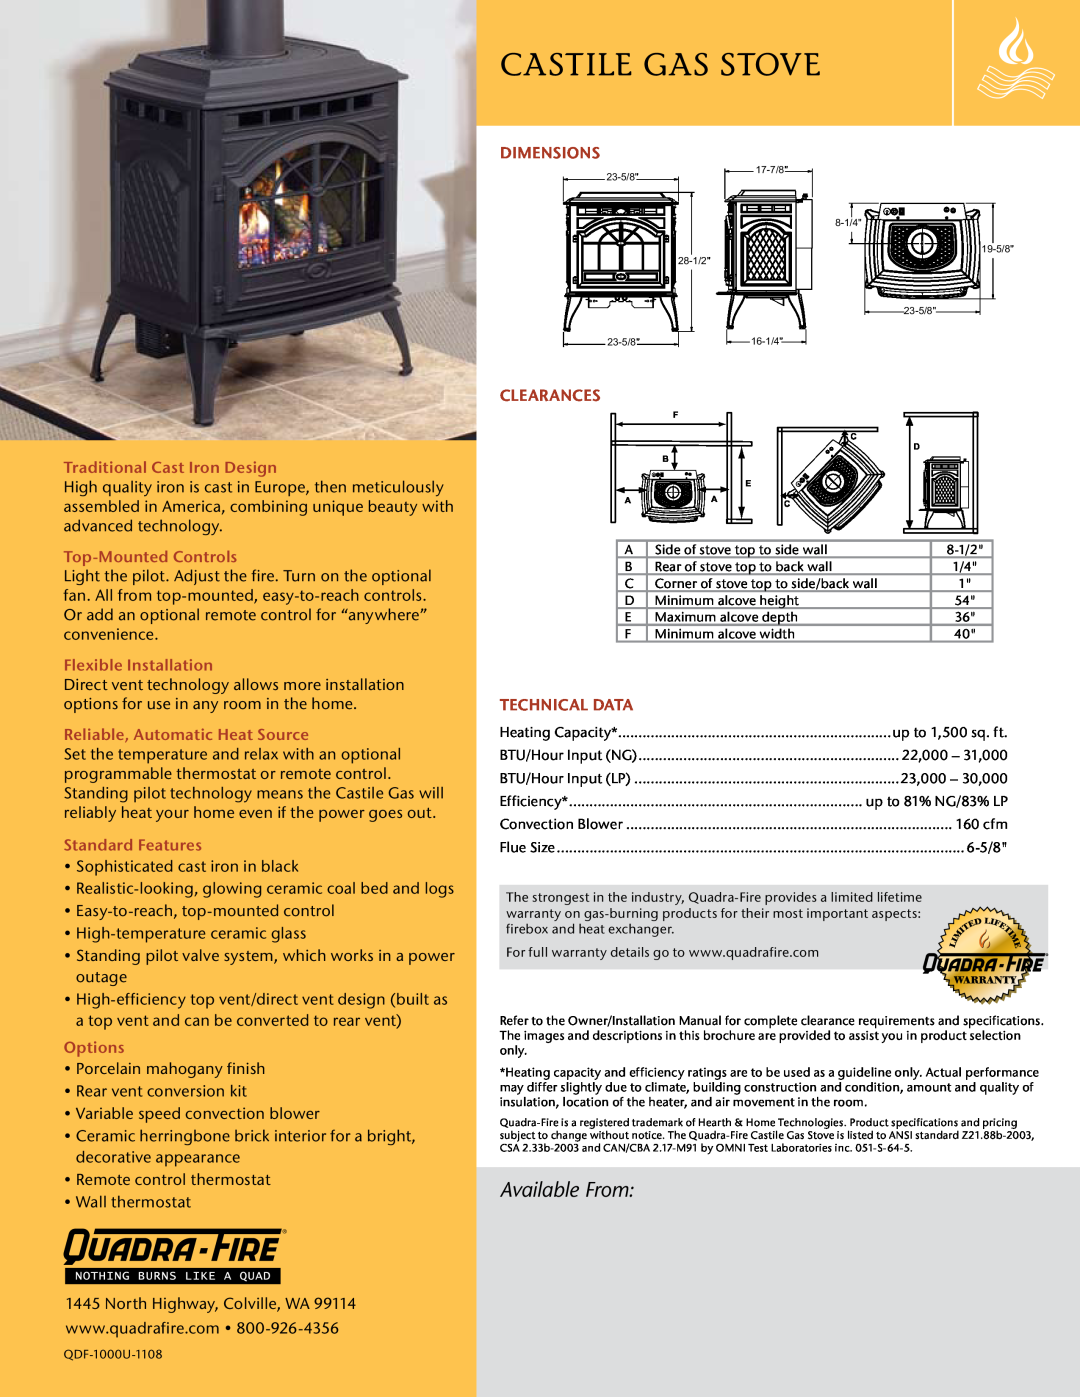 Hearth and Home Technologies Castile Gas Stove Available From, Traditional Cast Iron Design, Top-Mounted Controls, Options 